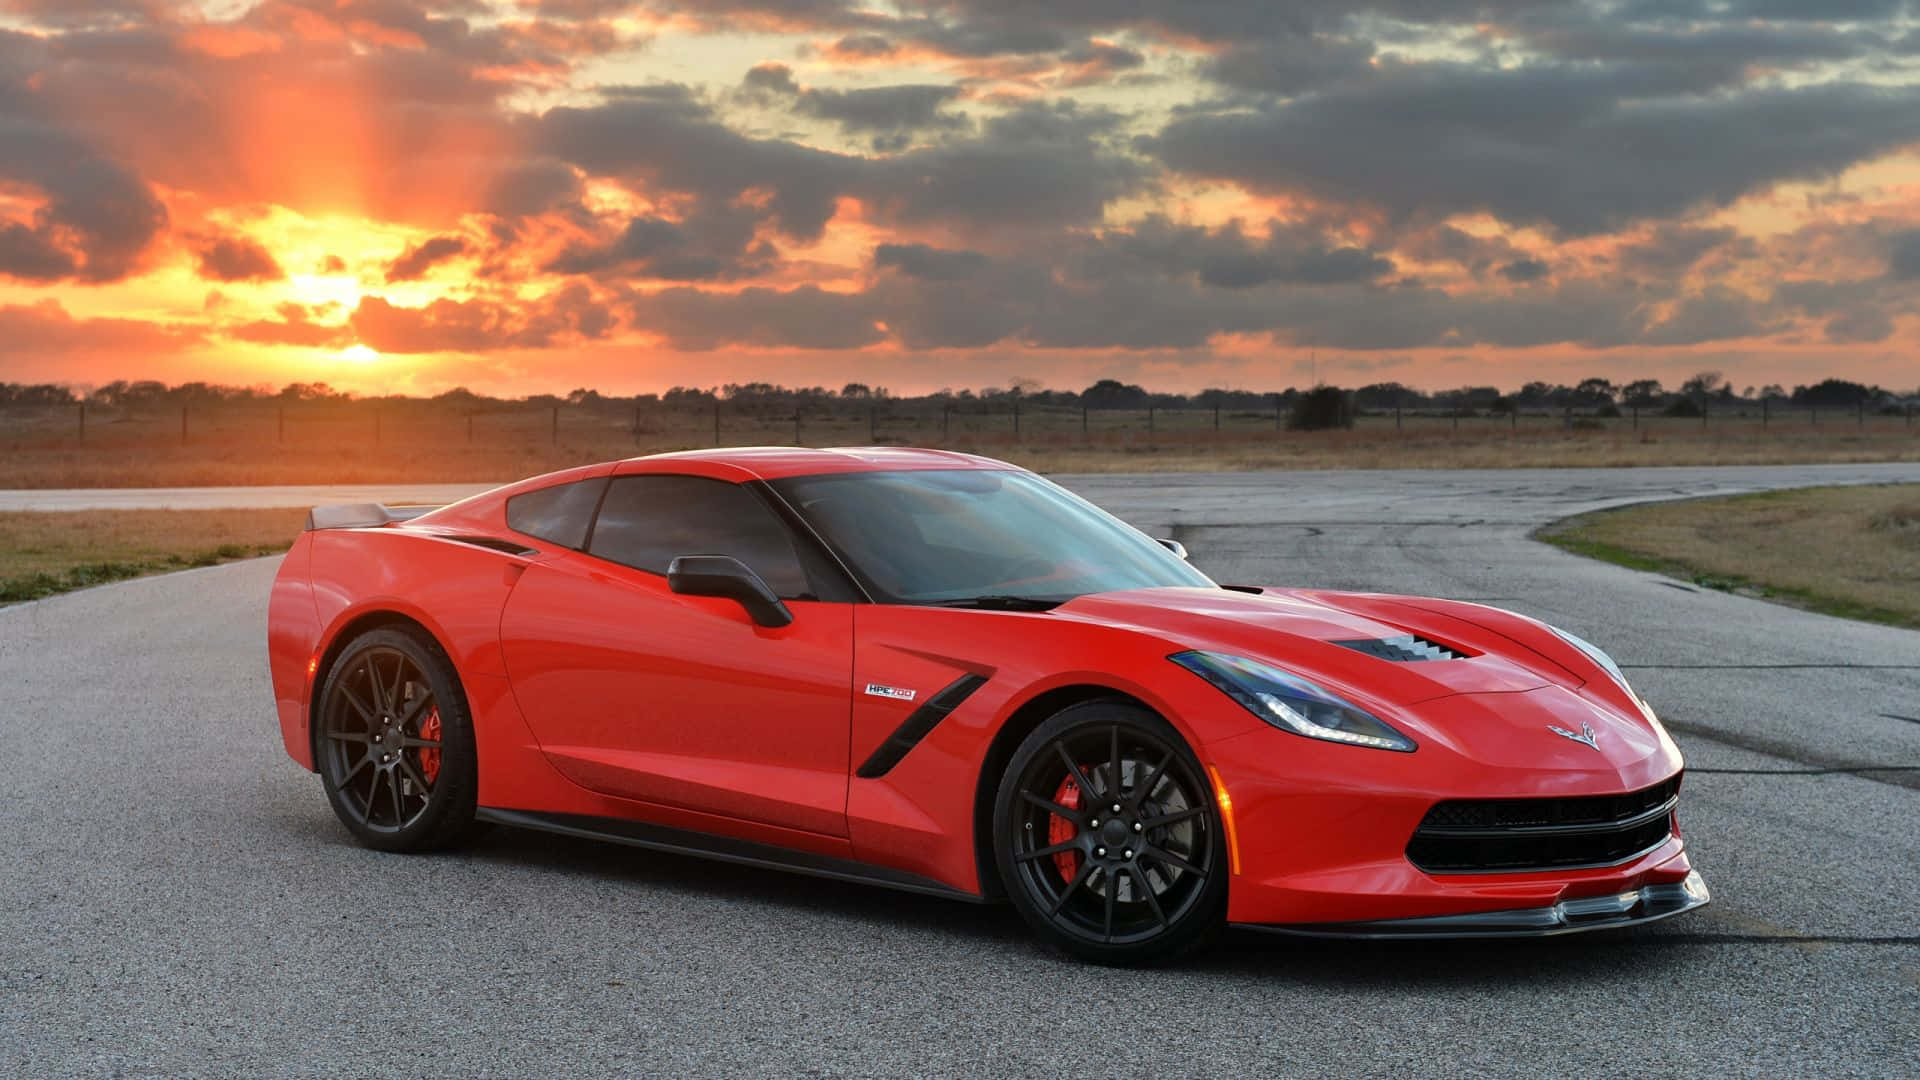 Experience The Thrill of Racing In A Corvette